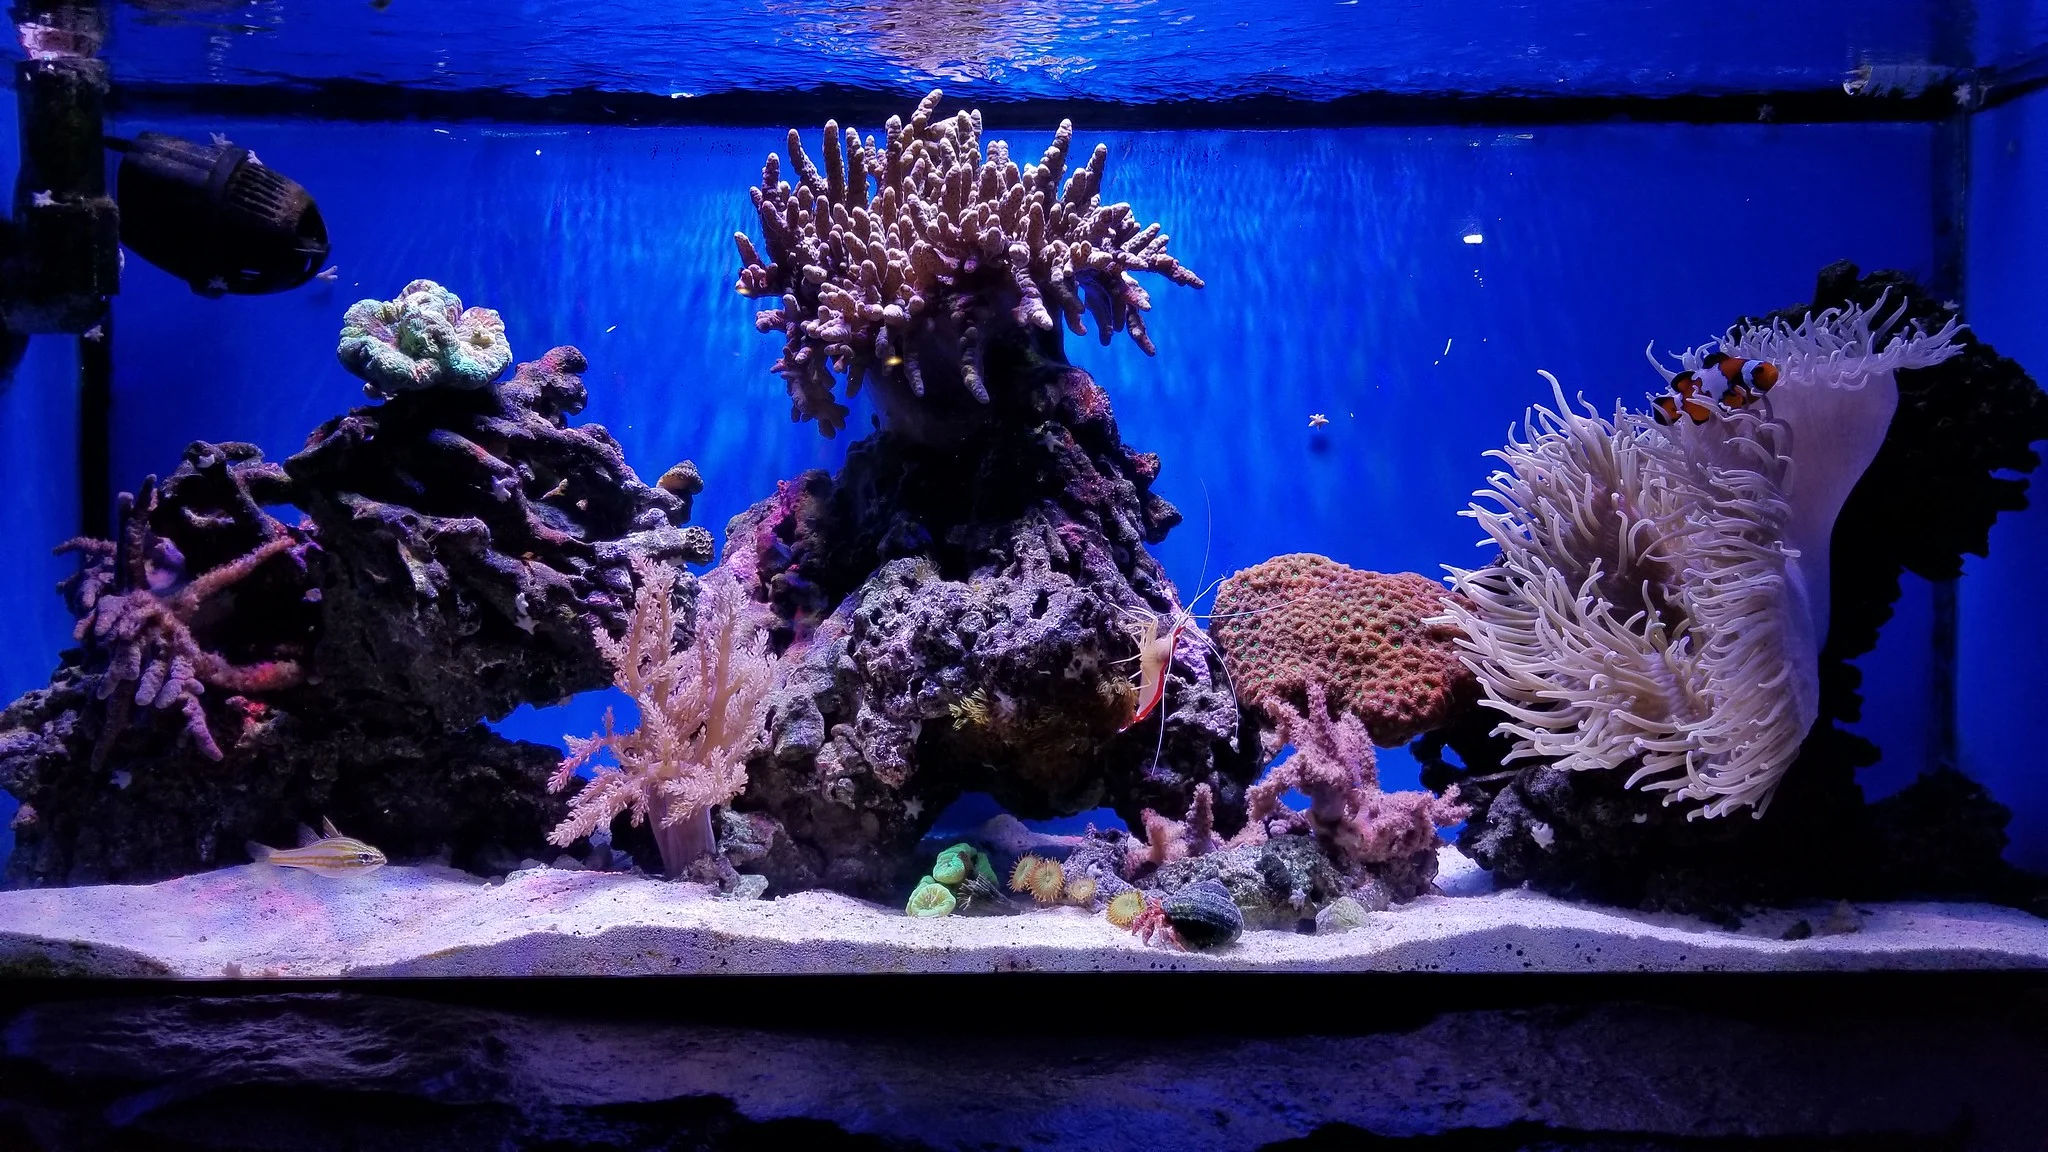 Variety of aquatic animals and magnificent corals in an aquarium setup at Aquarium of Boise, one of the best things to see in Idaho